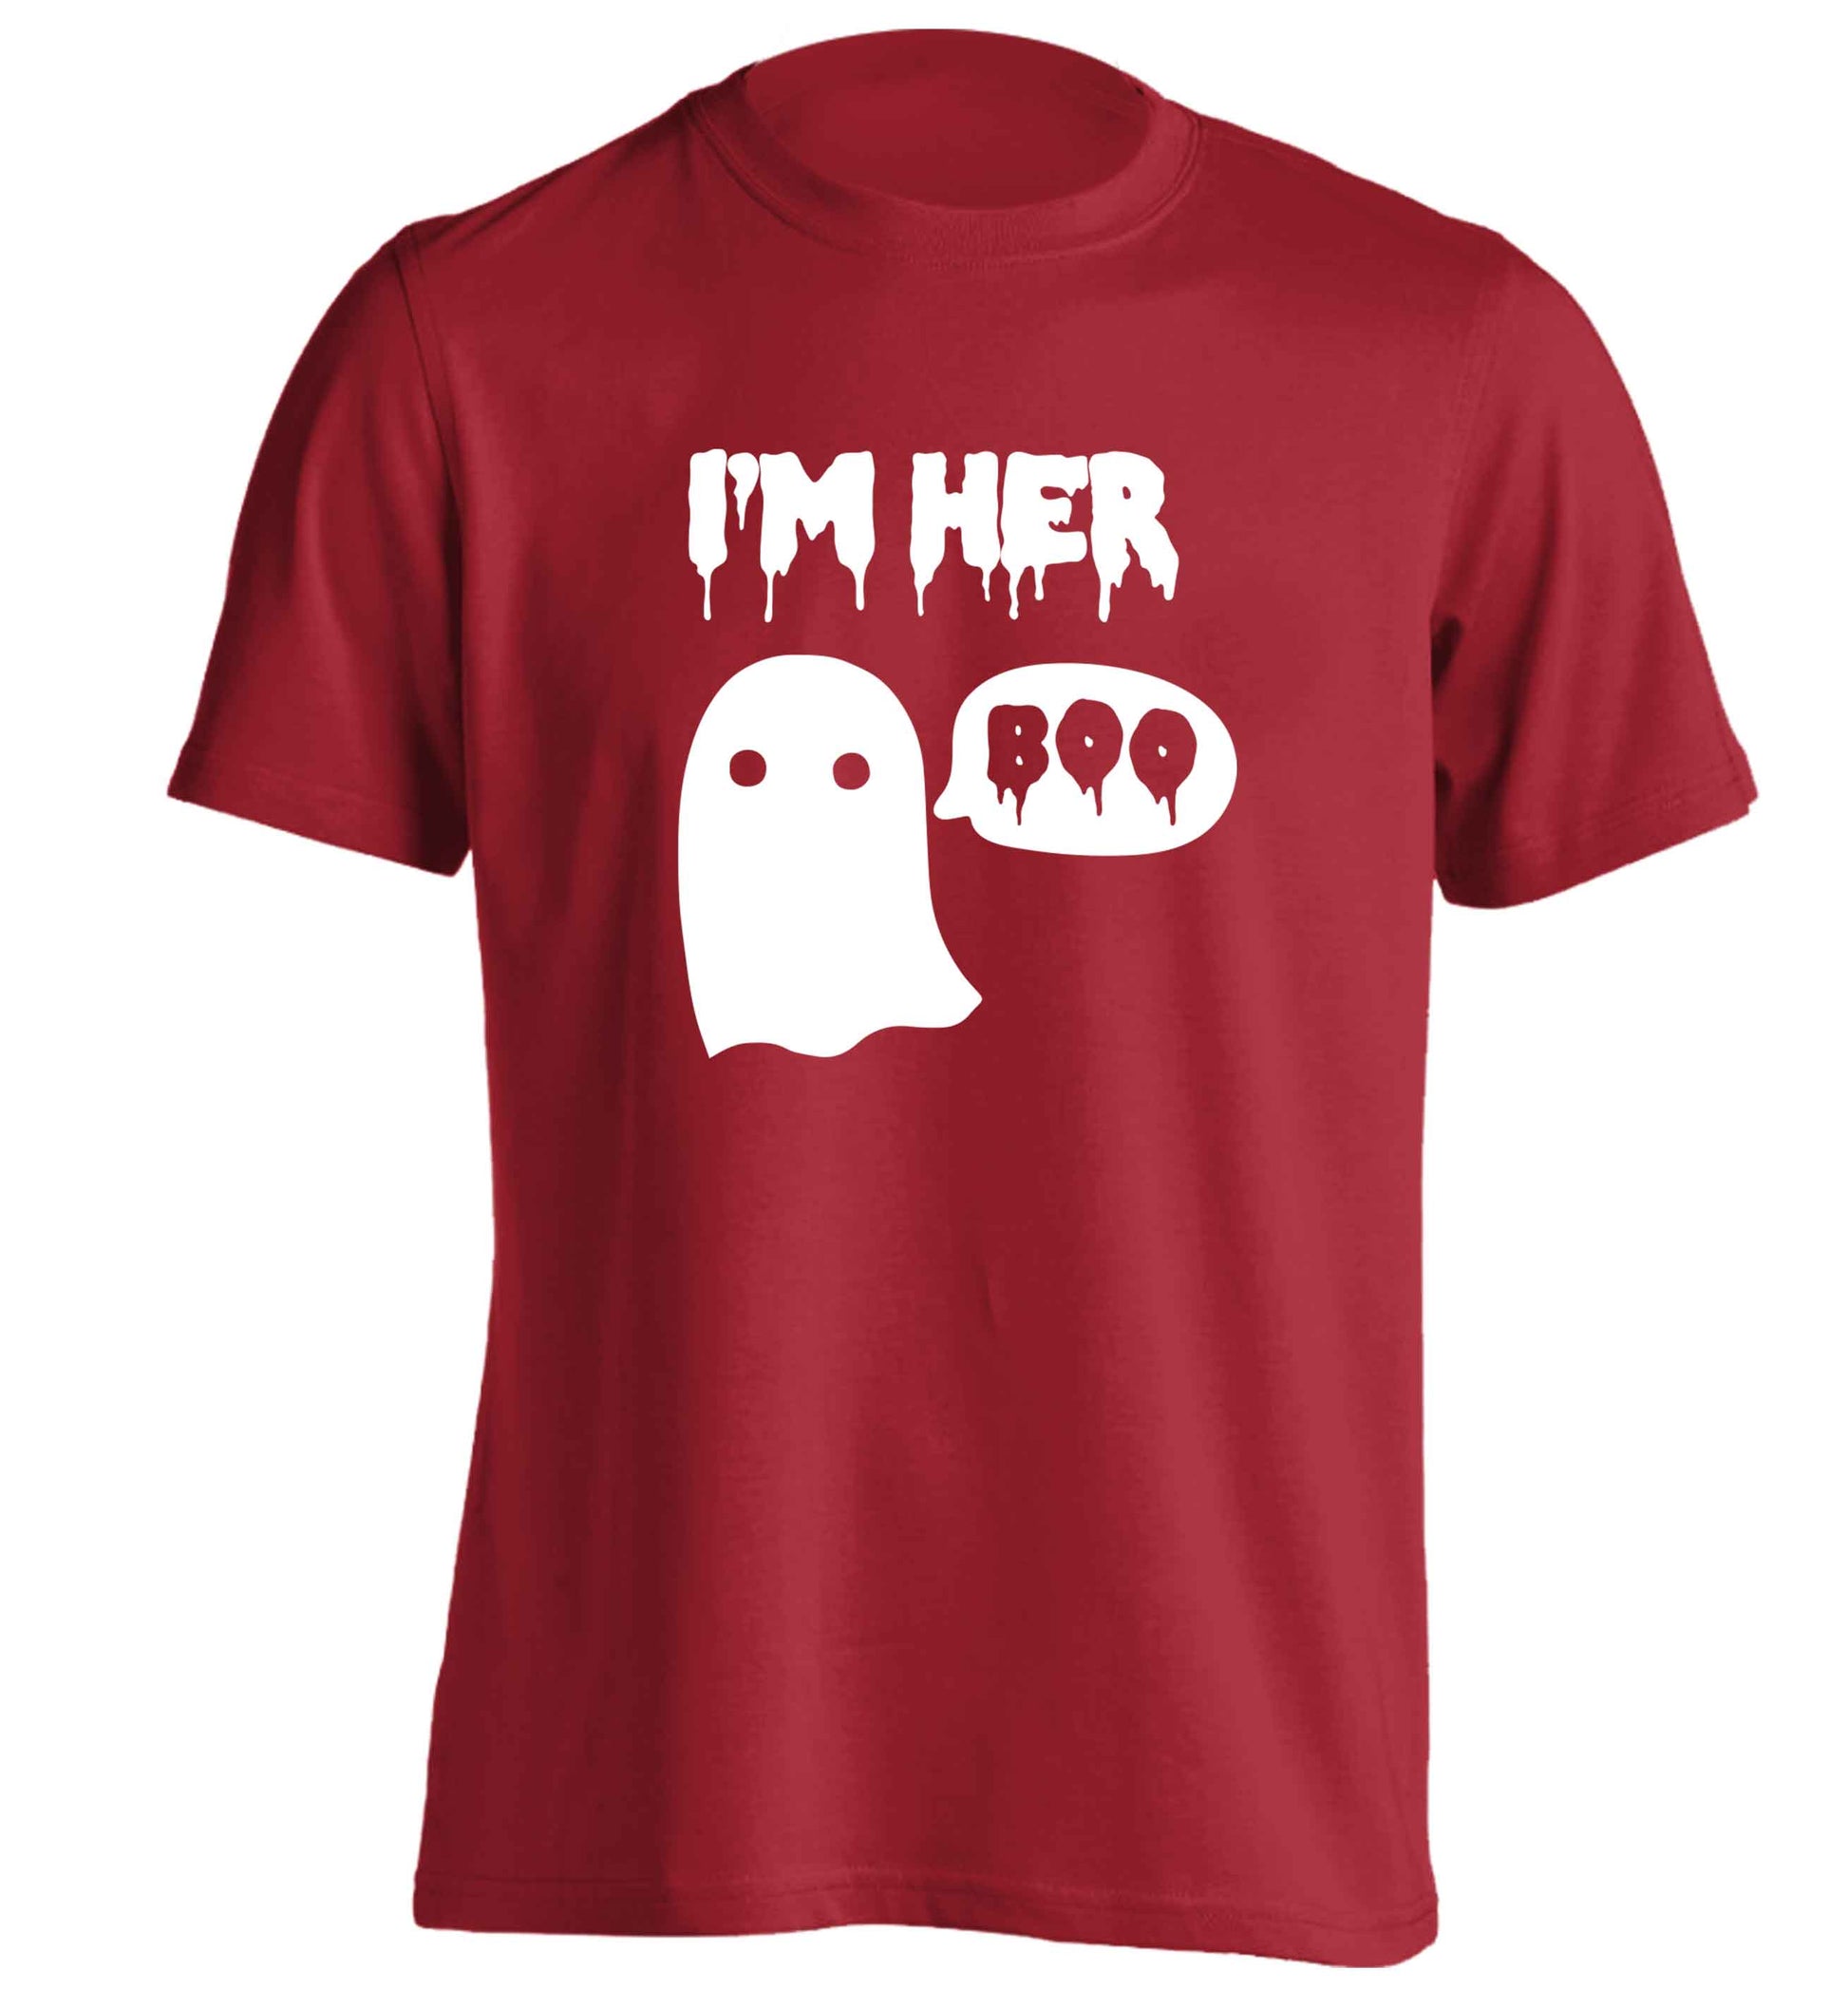 I'm her boo adults unisex red Tshirt 2XL